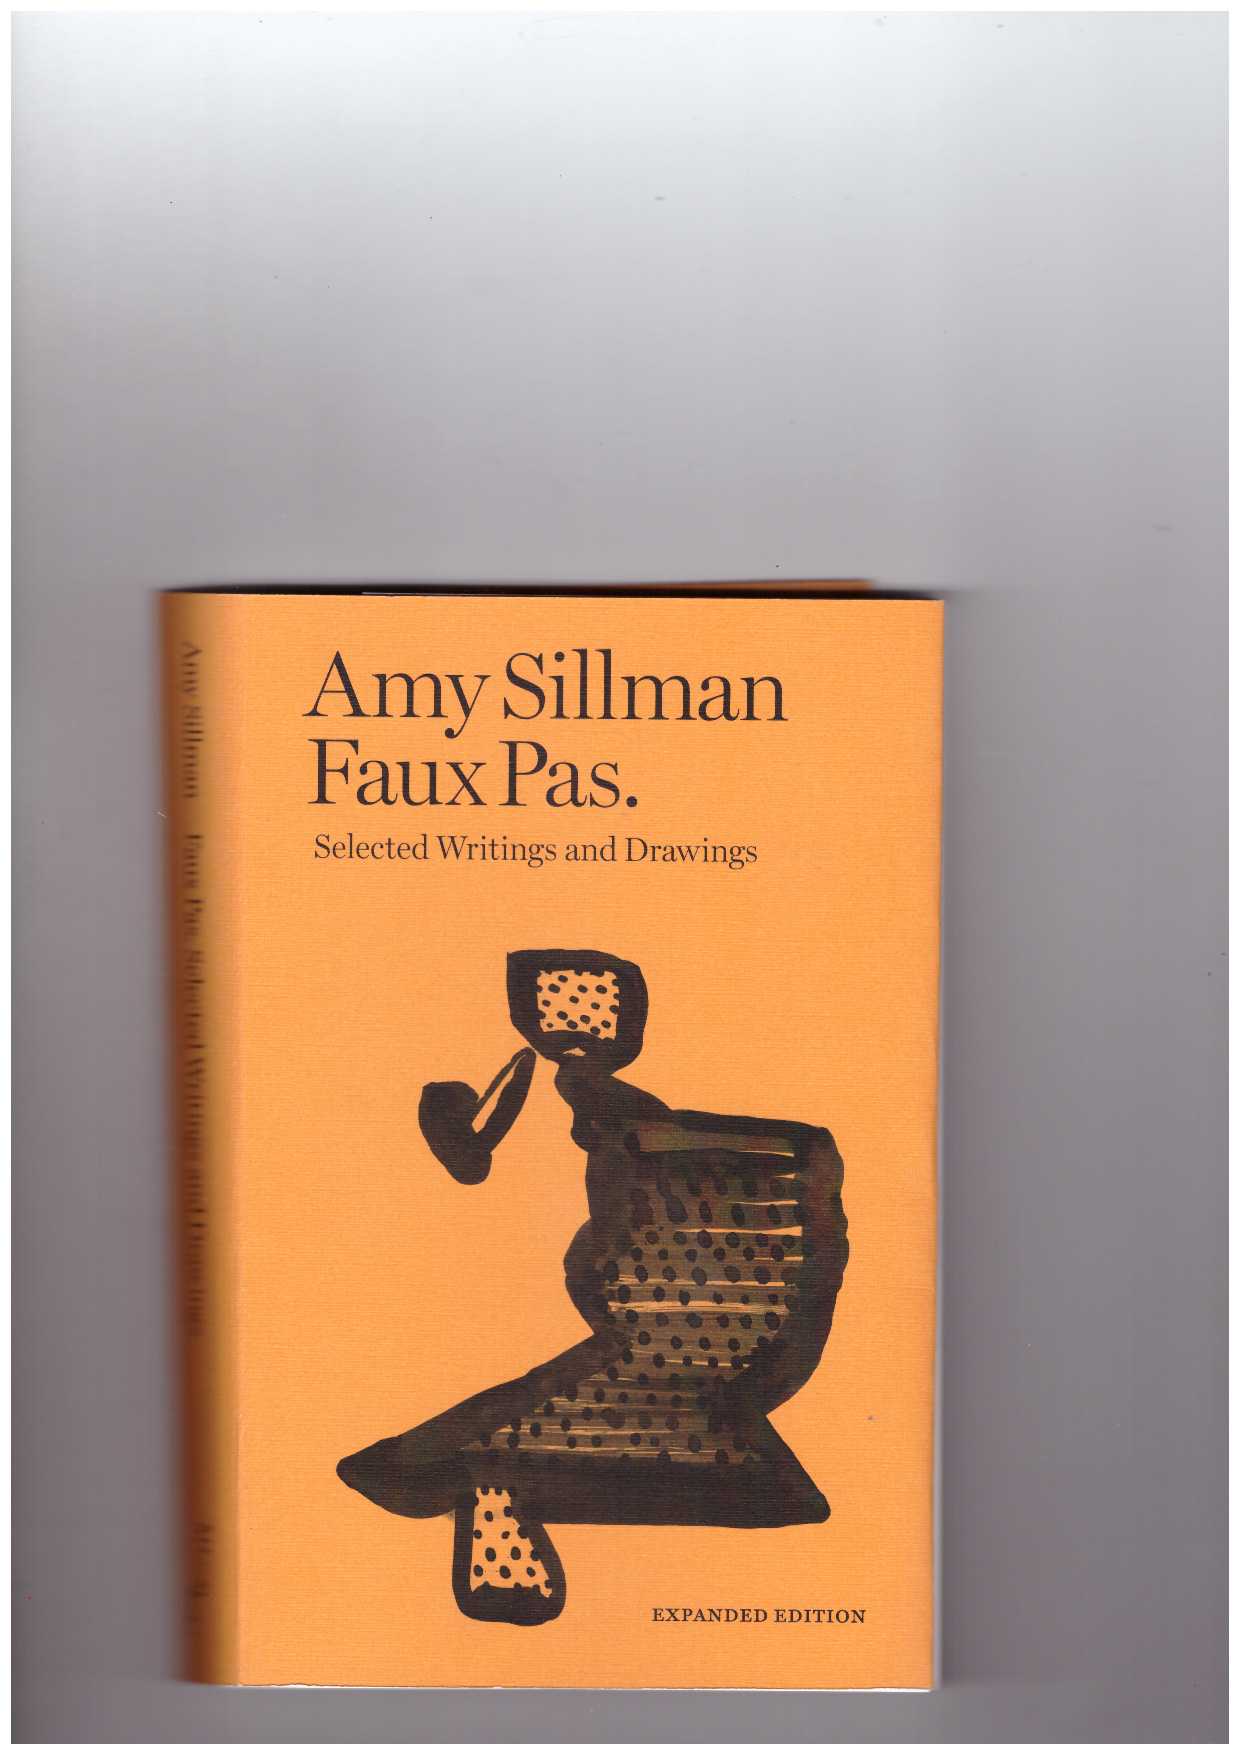 SILLMAN, Amy - Faux Pas. Selected Writings and Drawings (expanded edition)